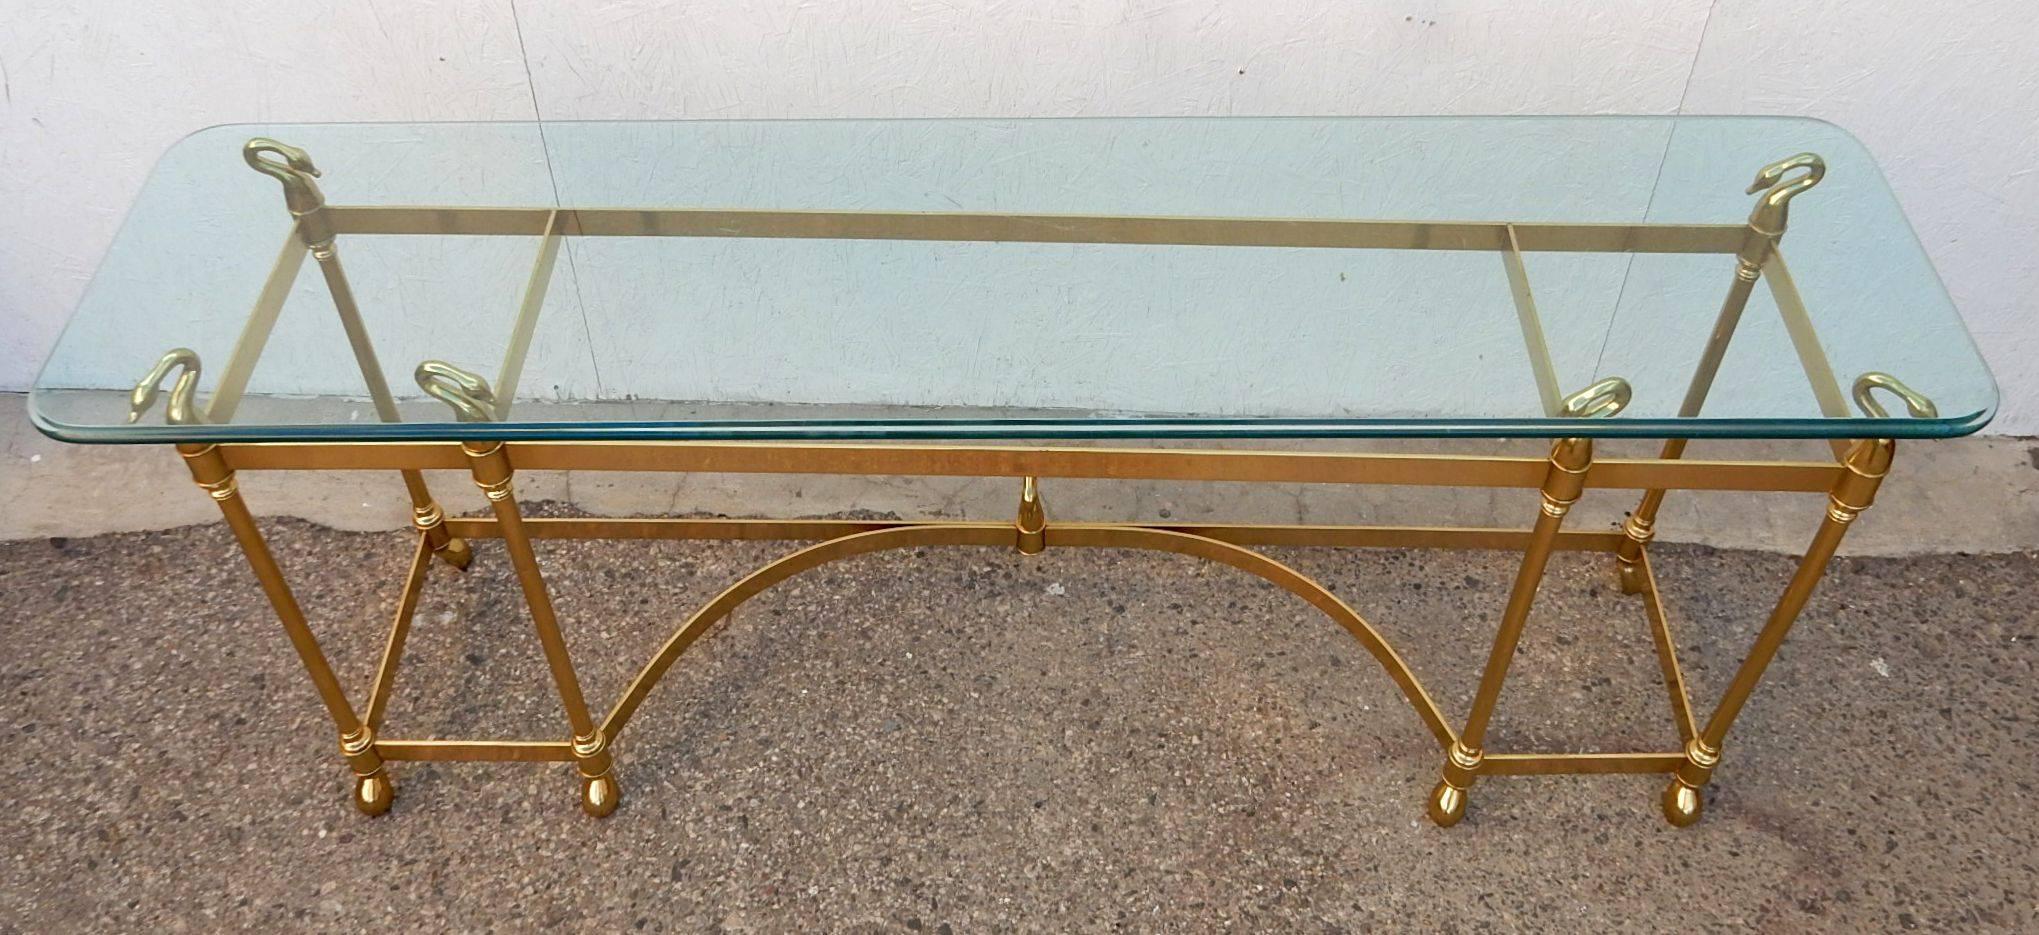 Fabulous vintage brass console table by LaBarge furniture with brass swan motif.
Beautiful golden brass flat bar construction with large beveled glass top.
Exceptional condition